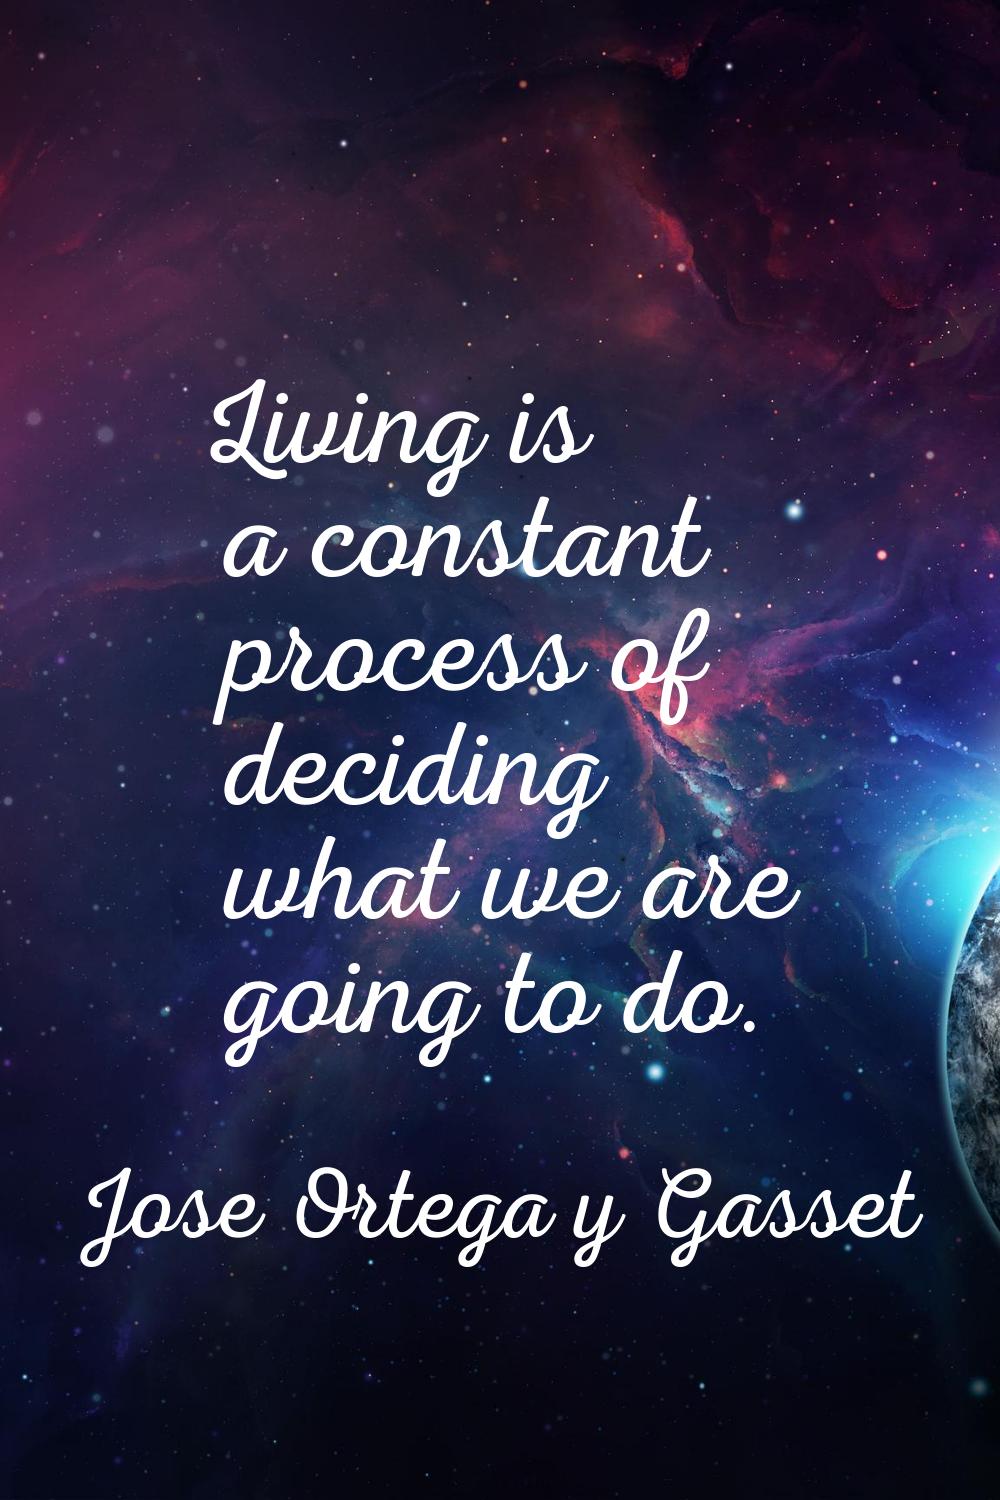 Living is a constant process of deciding what we are going to do.